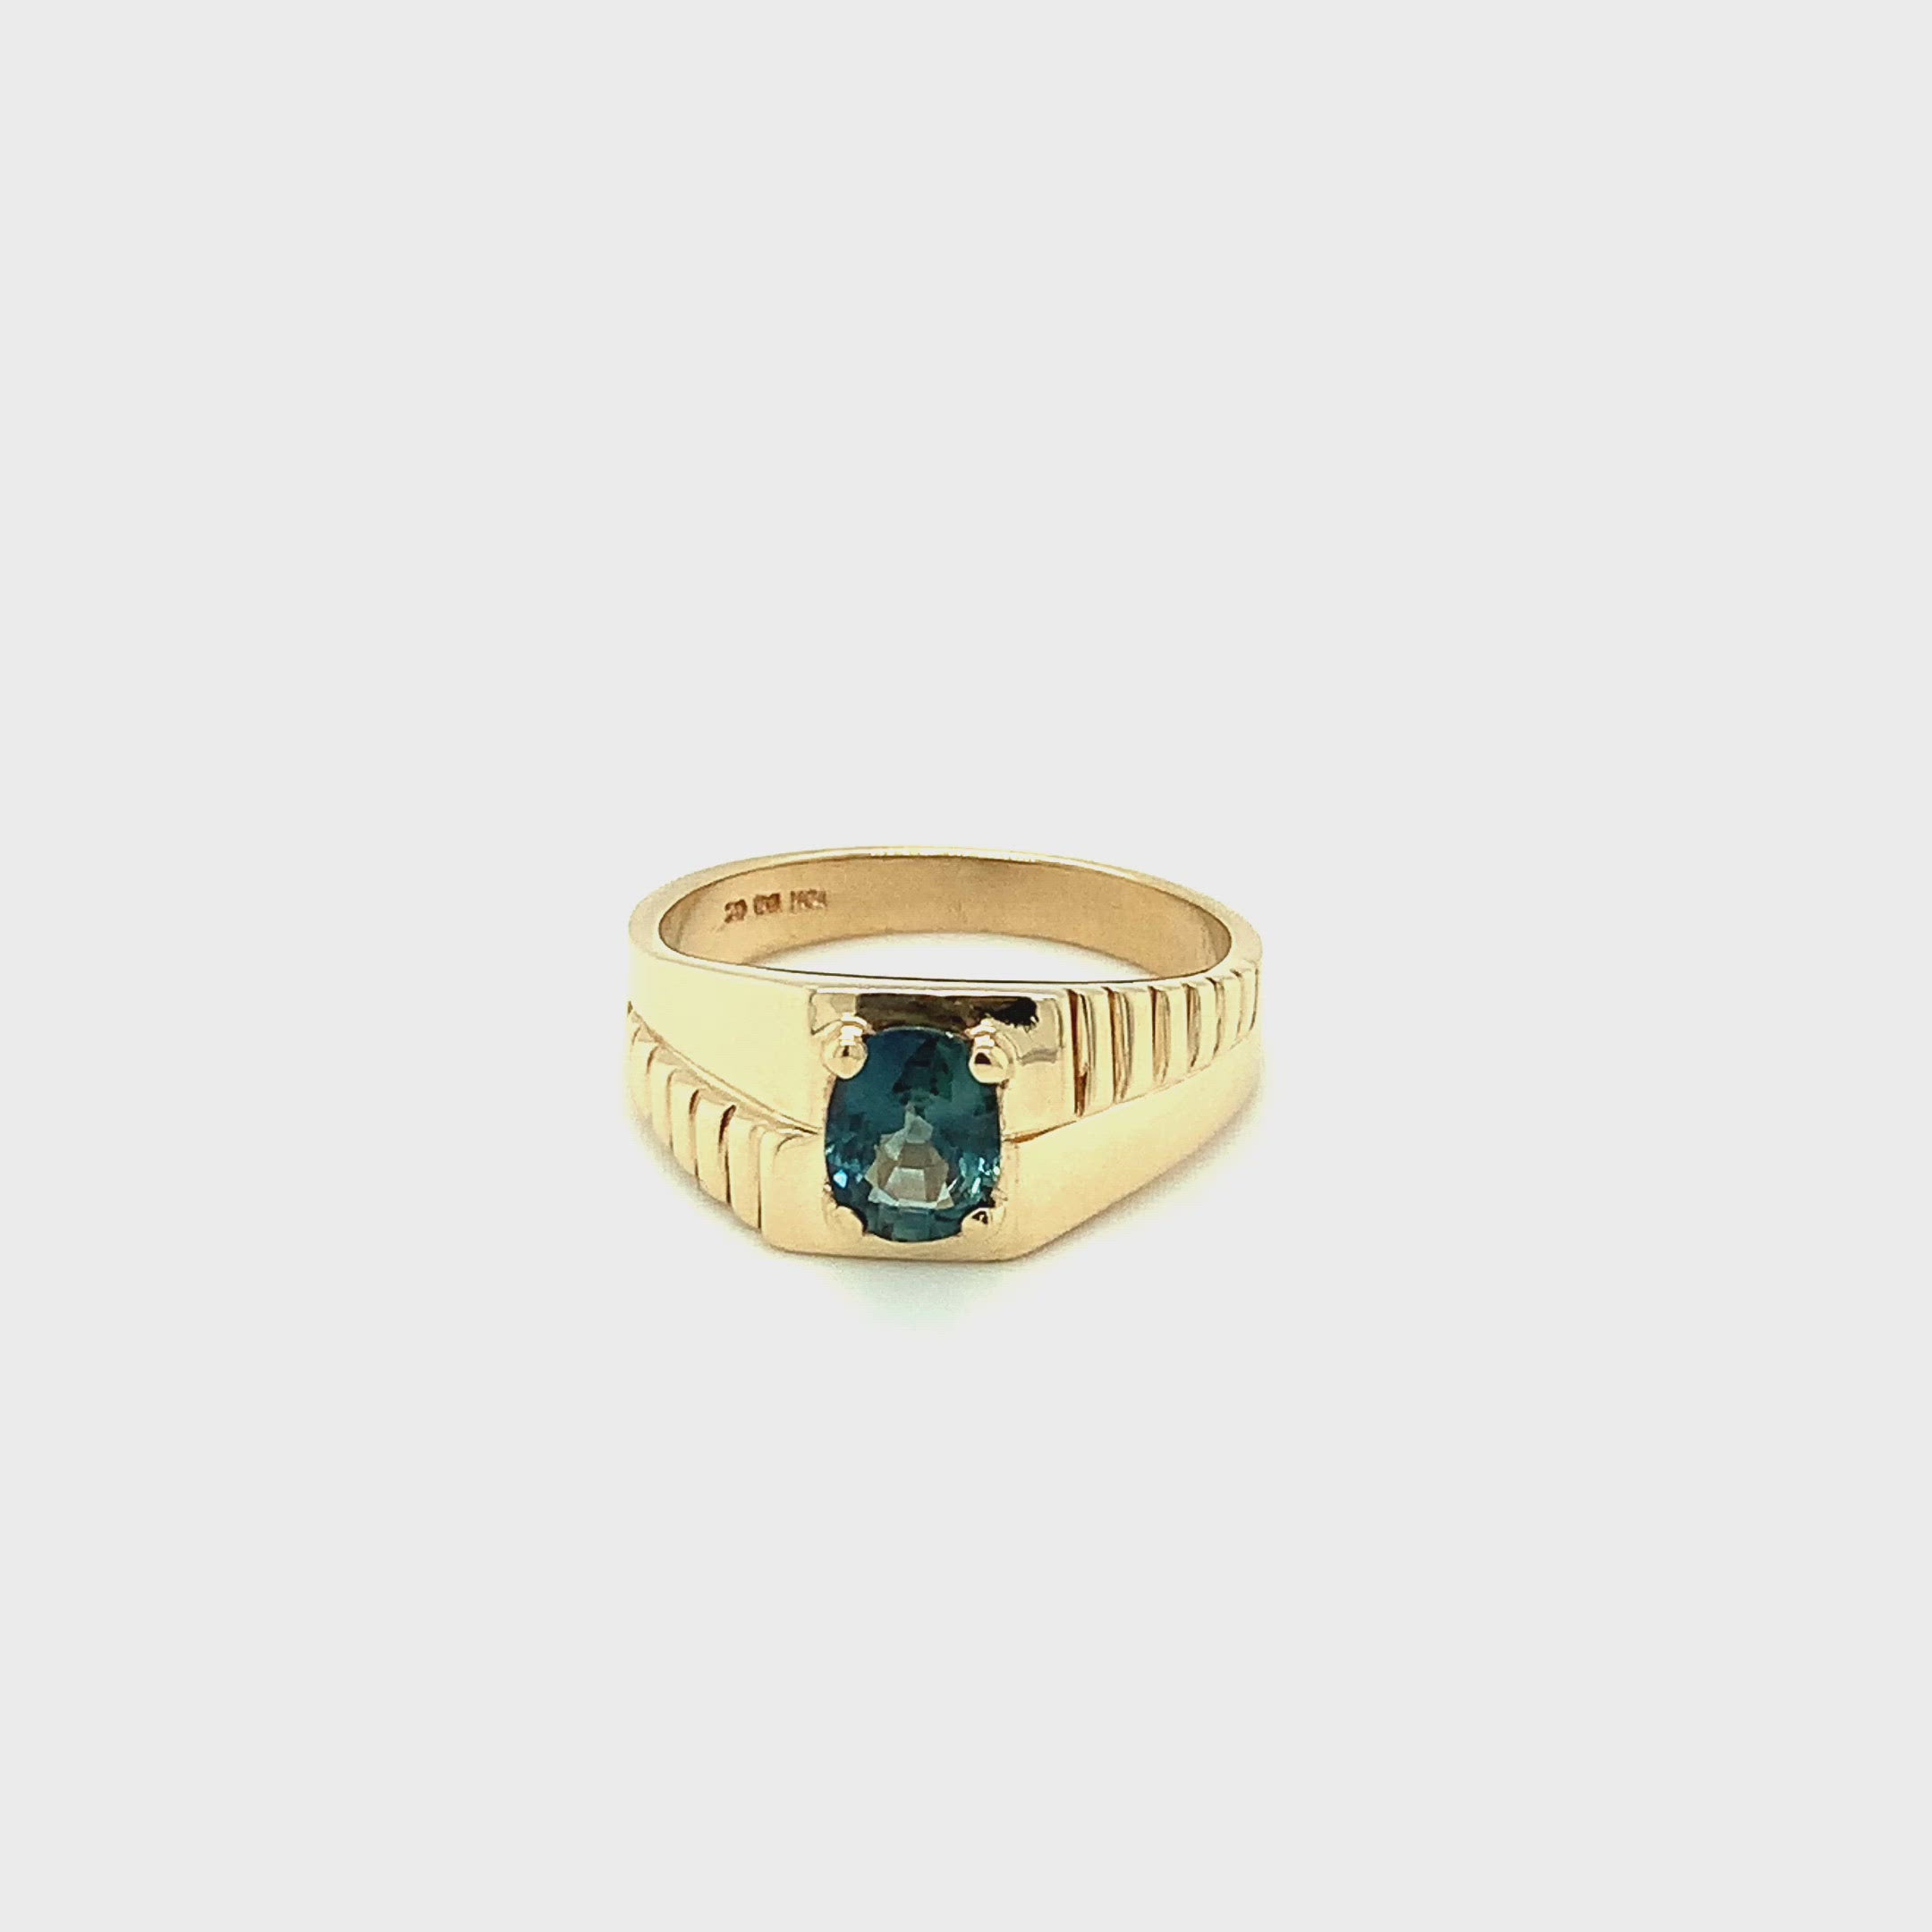 Natural Ceylon Sapphire Ring 10K Solid Gold 1.59ct Sri Lankan Sapphire Ring Solitaire Ring Gemstone Ring Statement Ring Men's Ring Jewellery